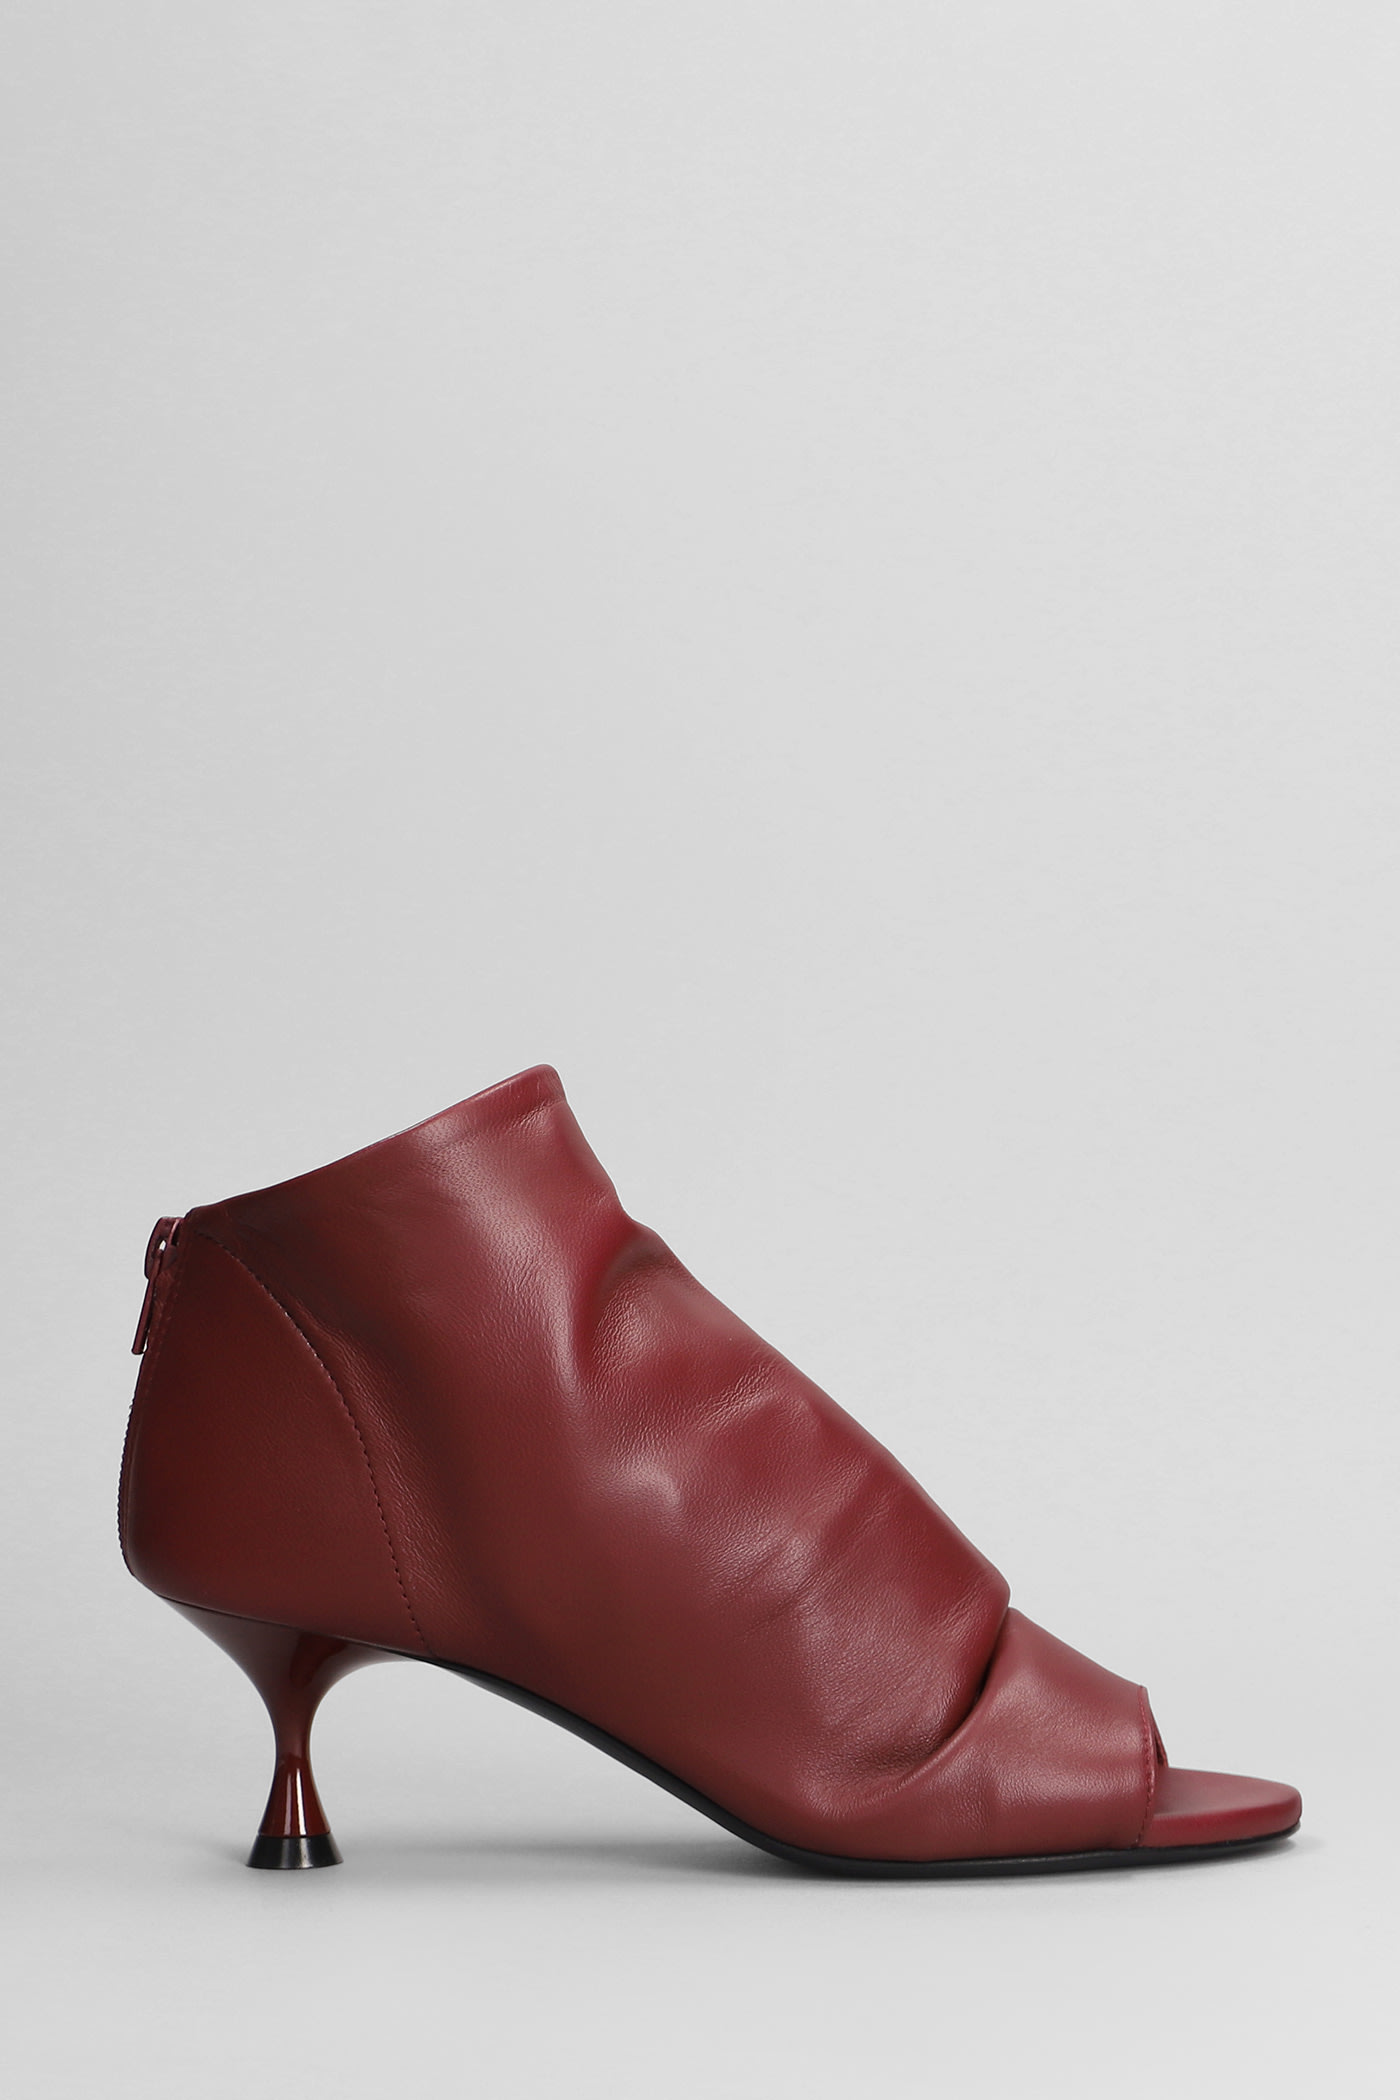 High Heels Ankle Boots In Bordeaux Leather